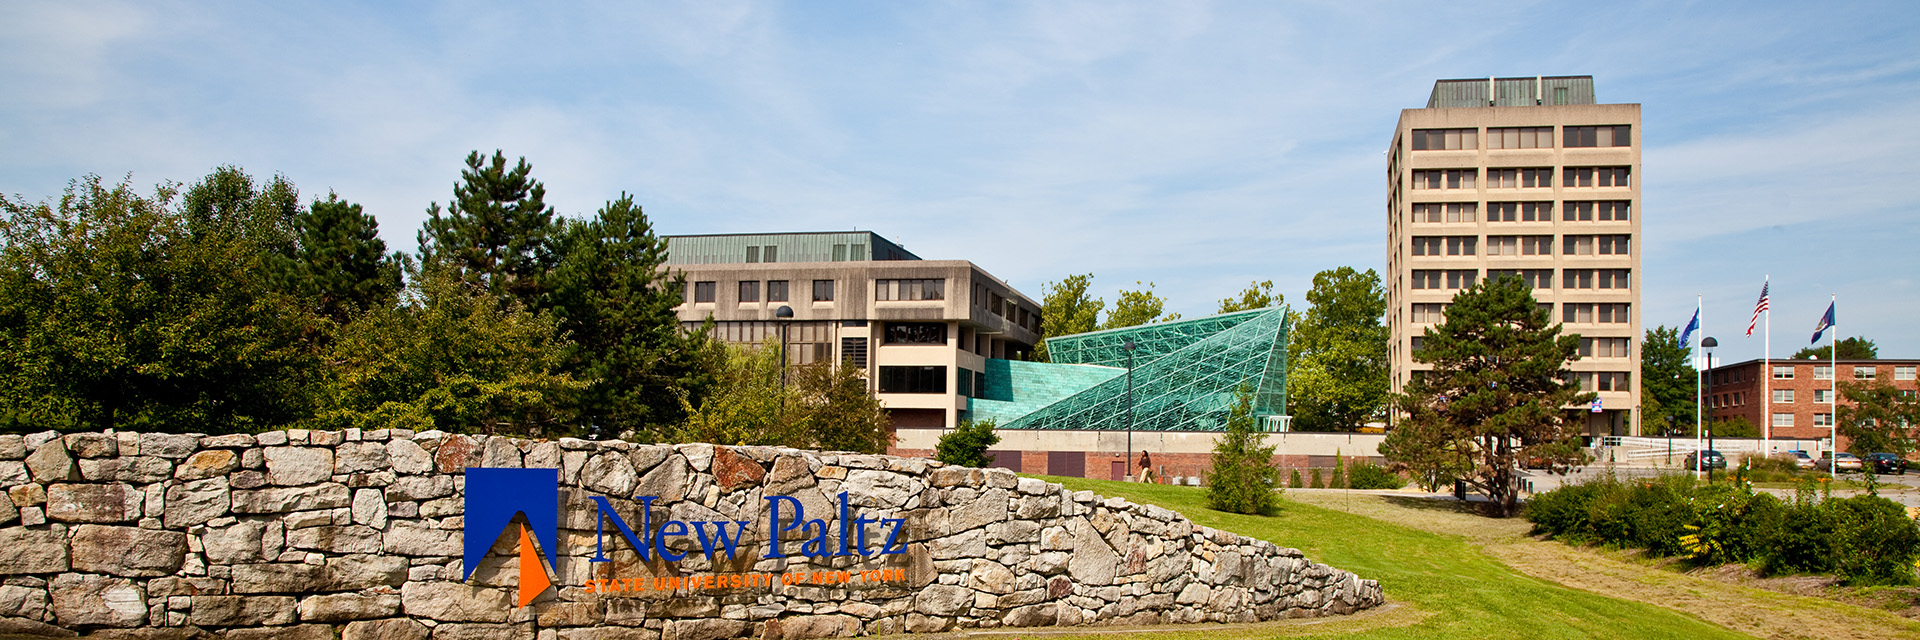 welcome-center-suny-new-paltz